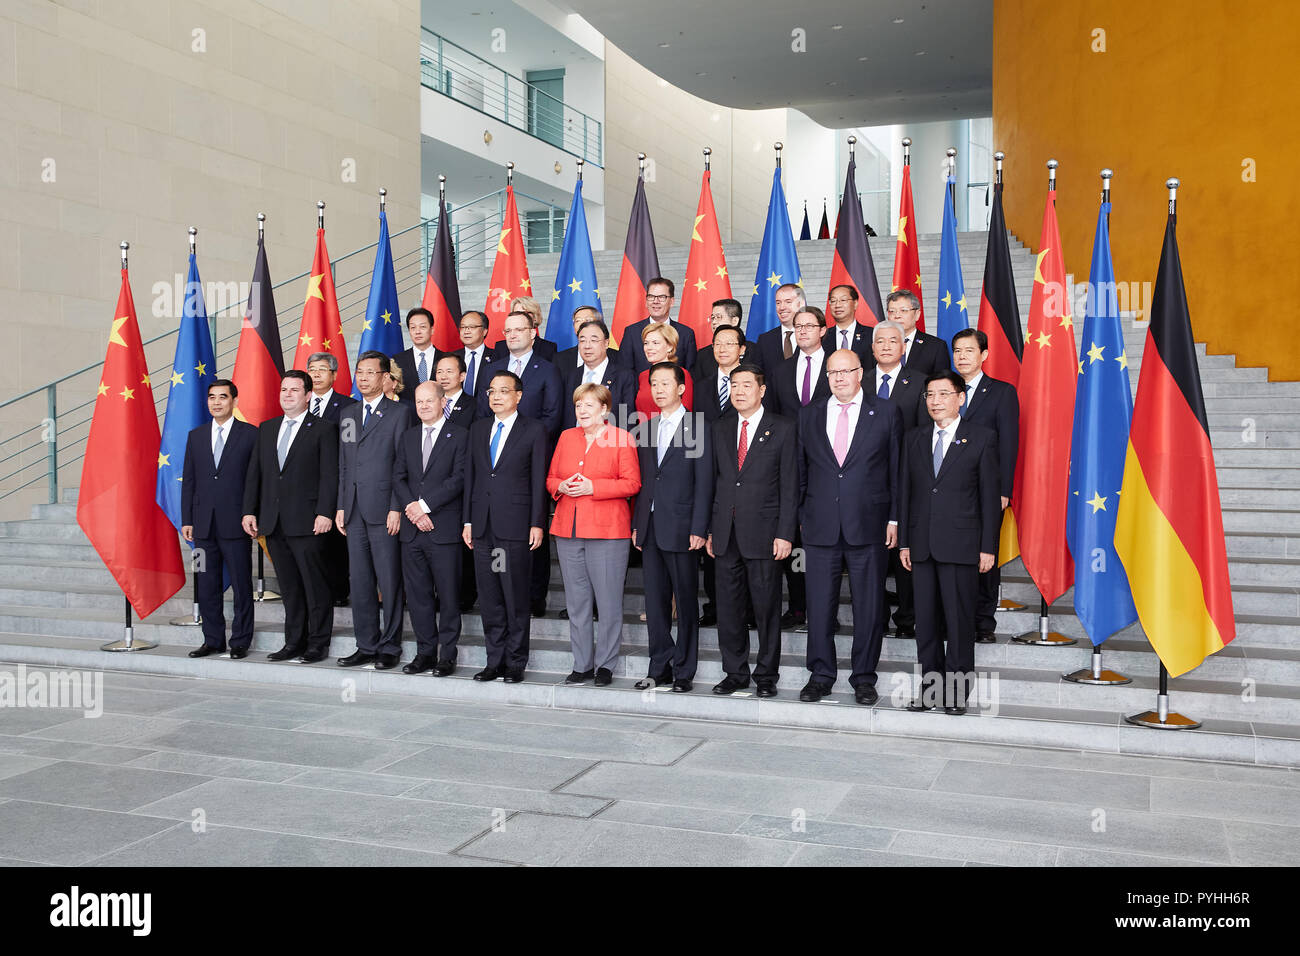 Berlin, Germany - Federal Chancellor Angela Merkel and Chinese Prime Minister Li Keqiang together with the German-Chinese delegations in the Federal Chancellery at the photo session. Stock Photo